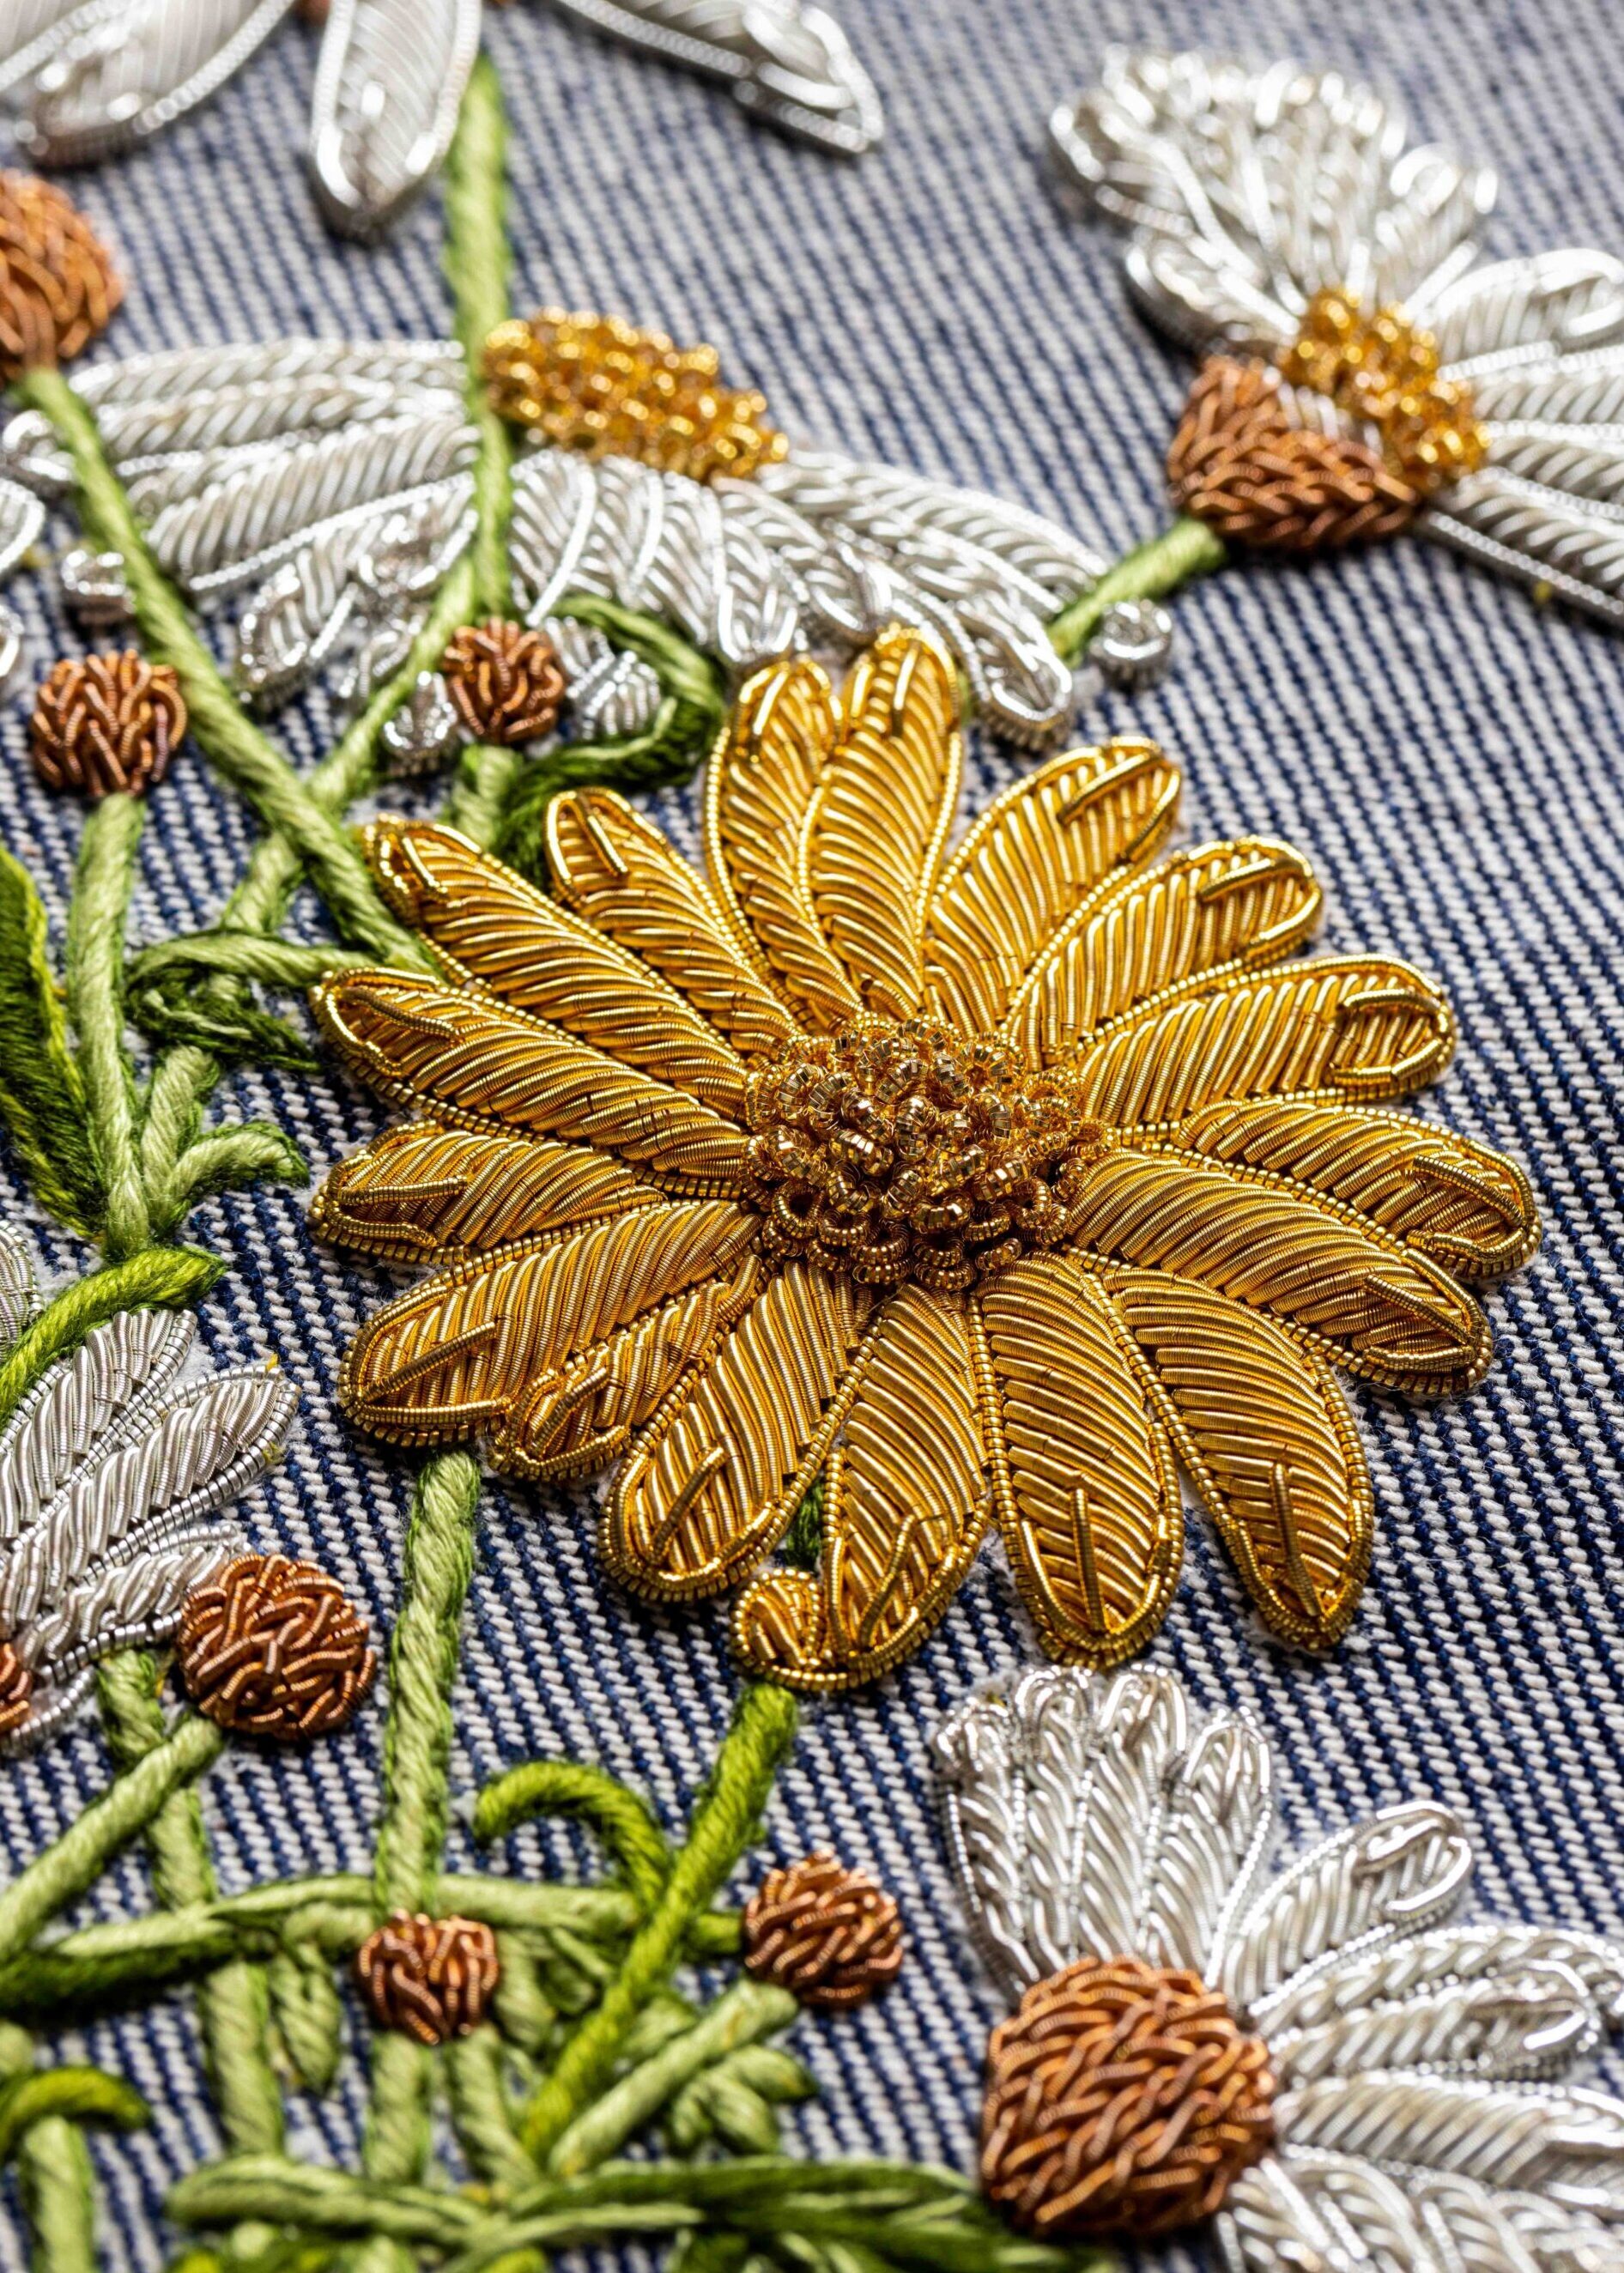 Embroidered flowers for Mother's Day